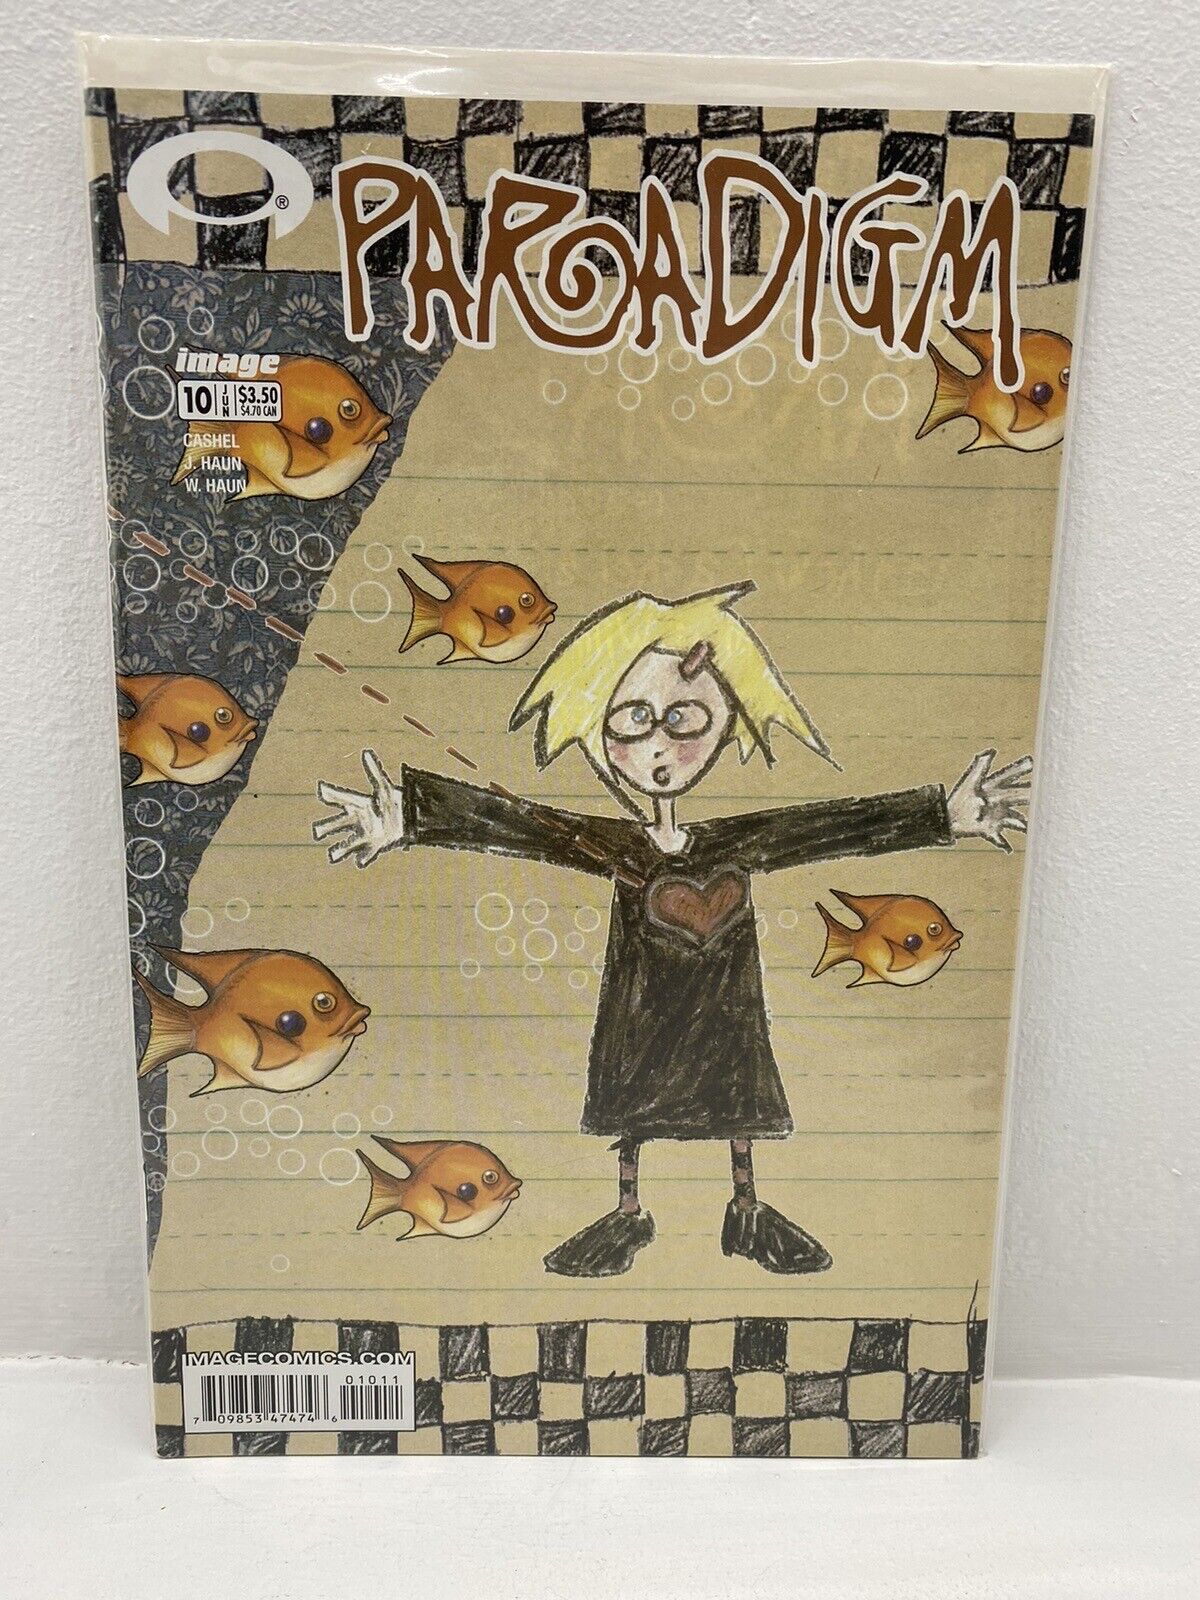 Paradigm #10 Image Comics Bagged And Boarded